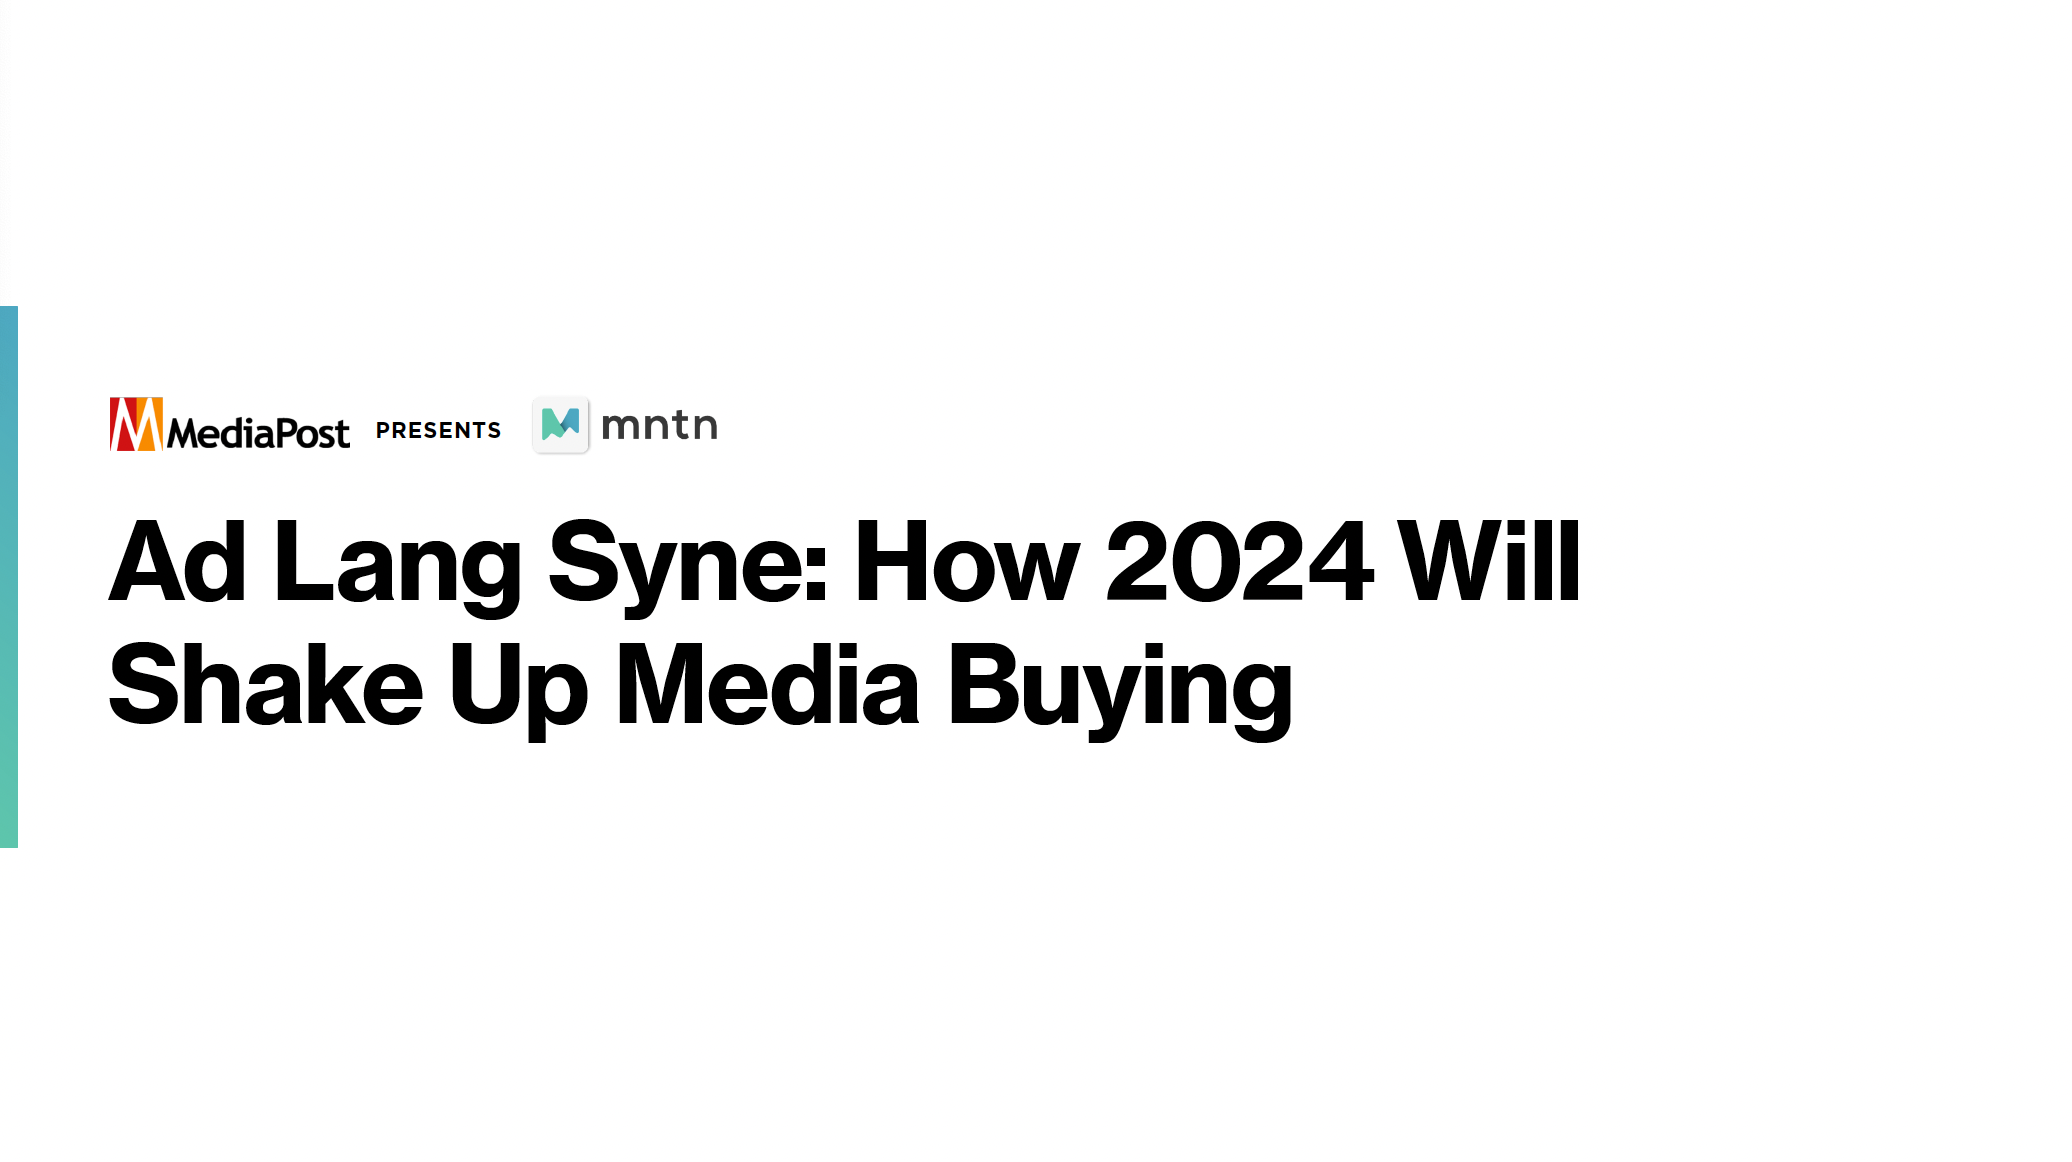 Ad Lang Syne: How 2024 Will Shake Up Media Buying